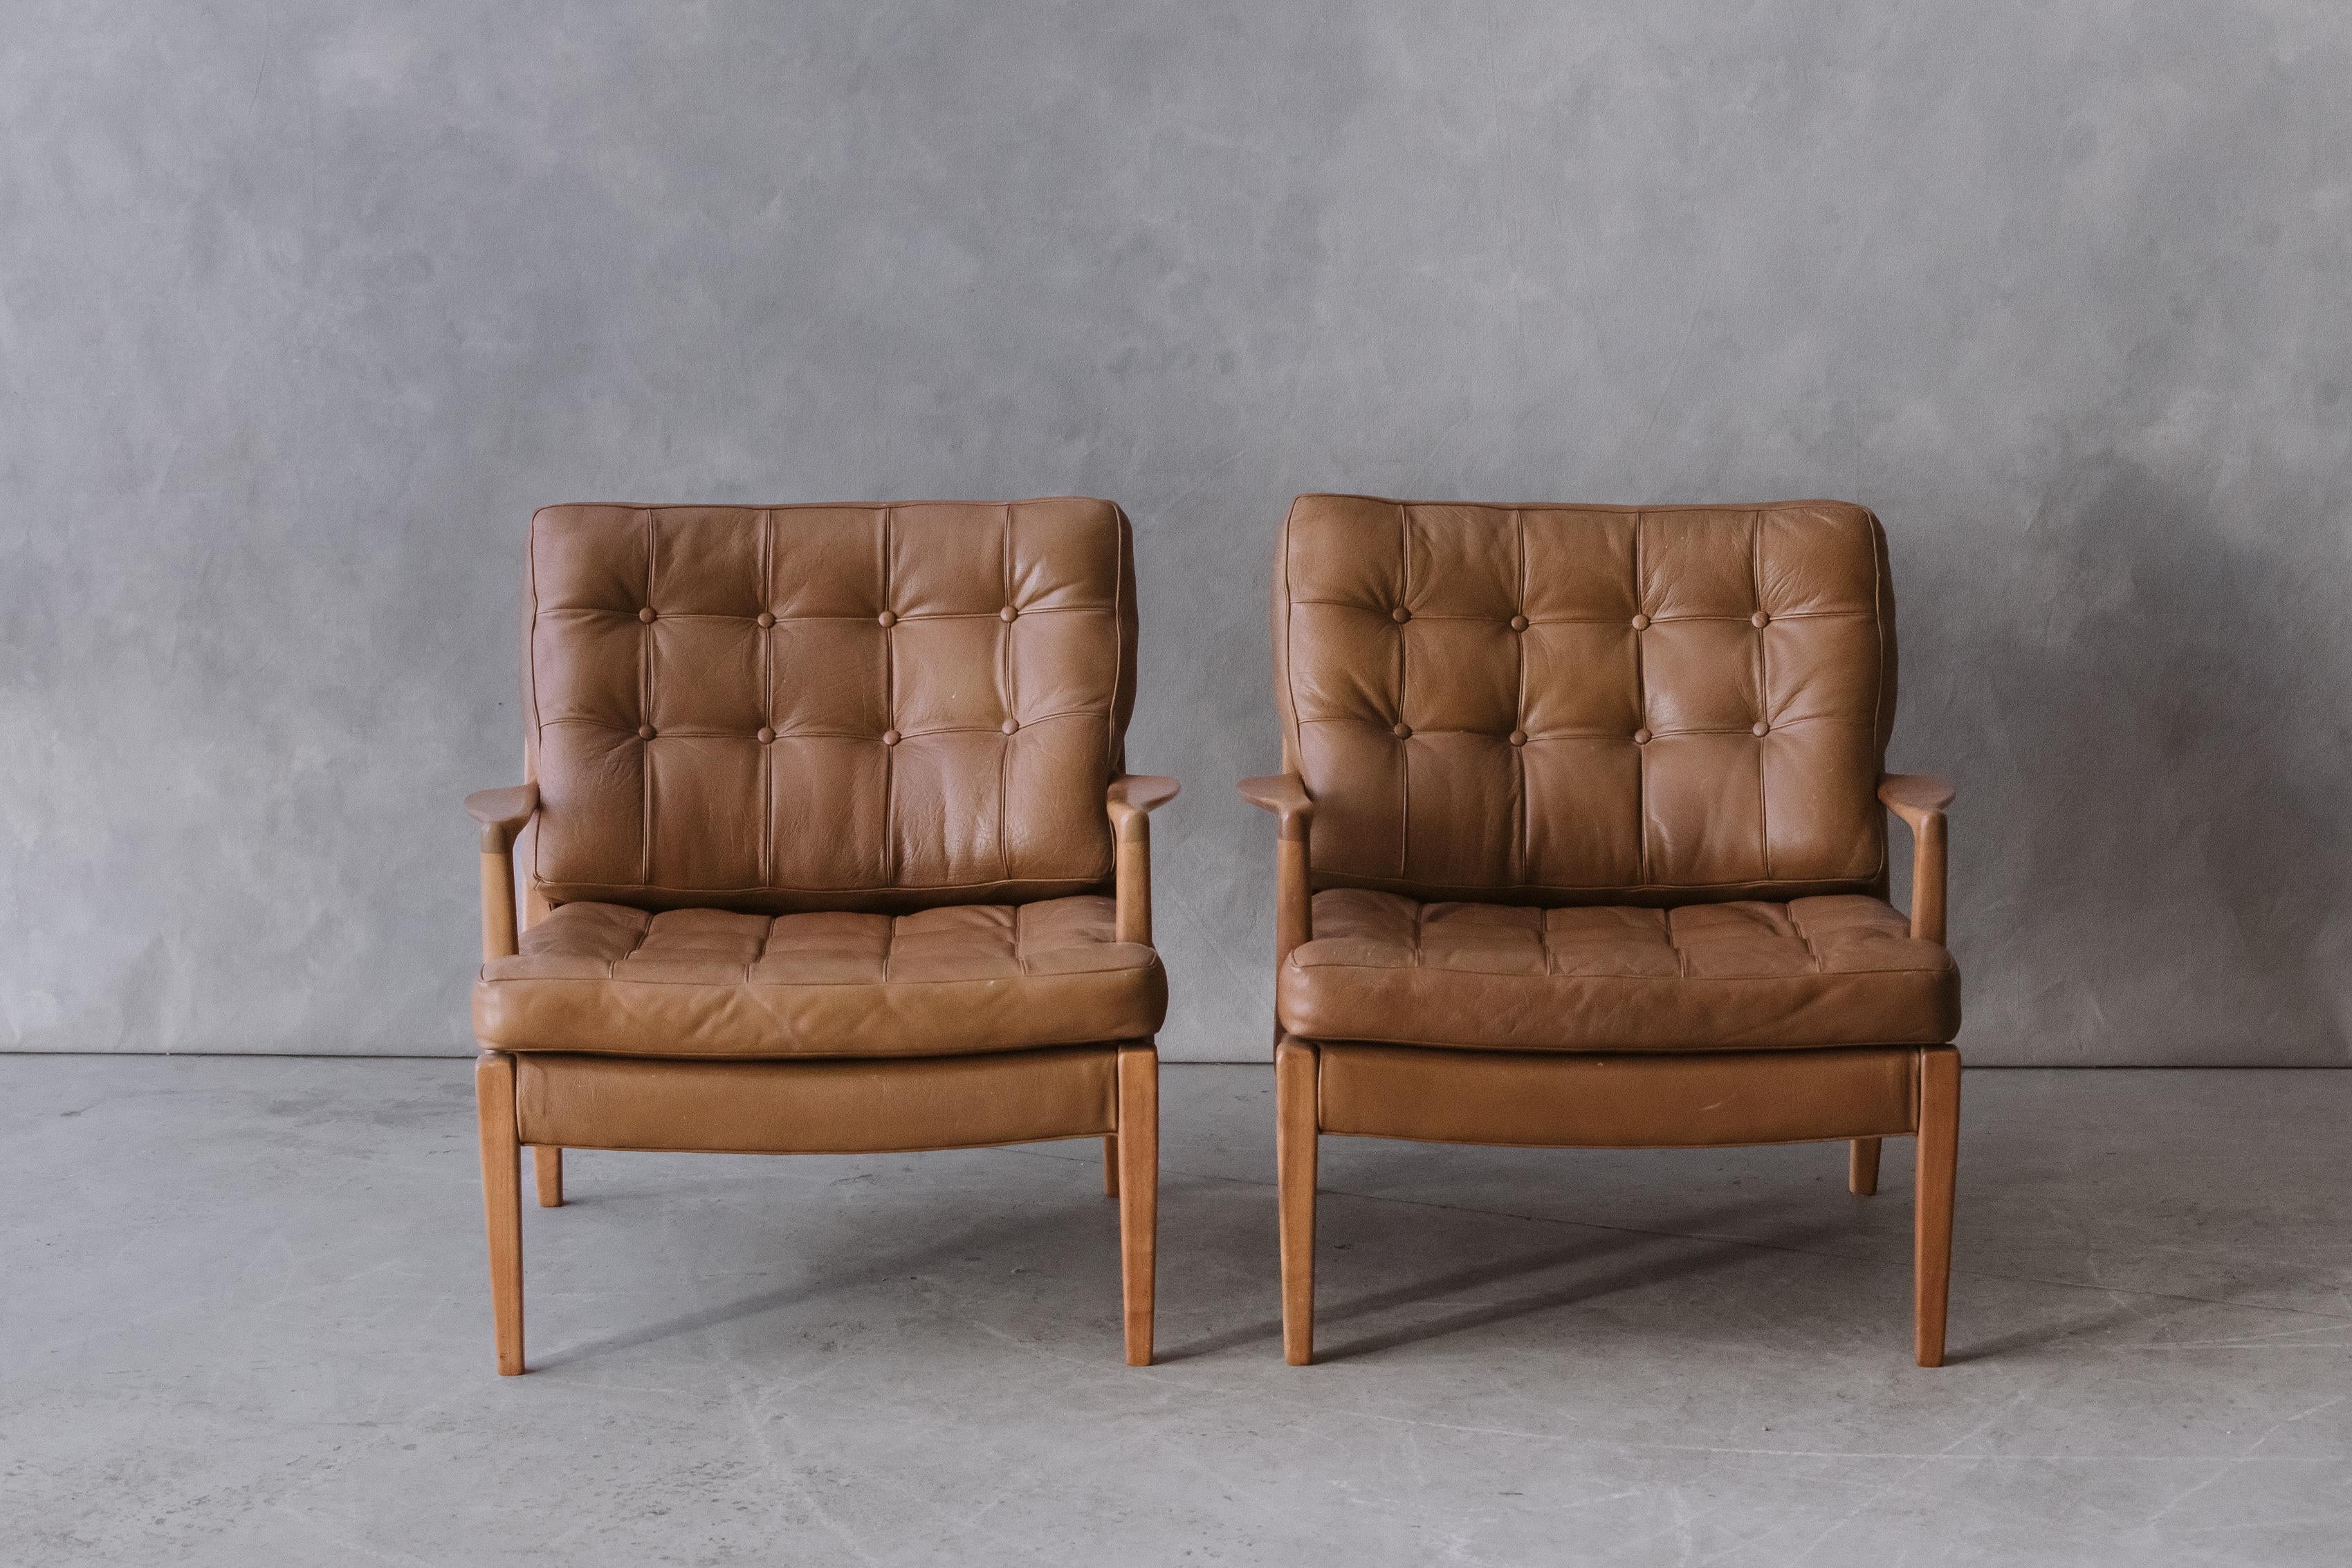 Vintage pair of Arne Norell lounge chairs, Model Merkur, Sweden 1970s. Solid birch frame construction with original tan leather cushions. Light wear and use.


